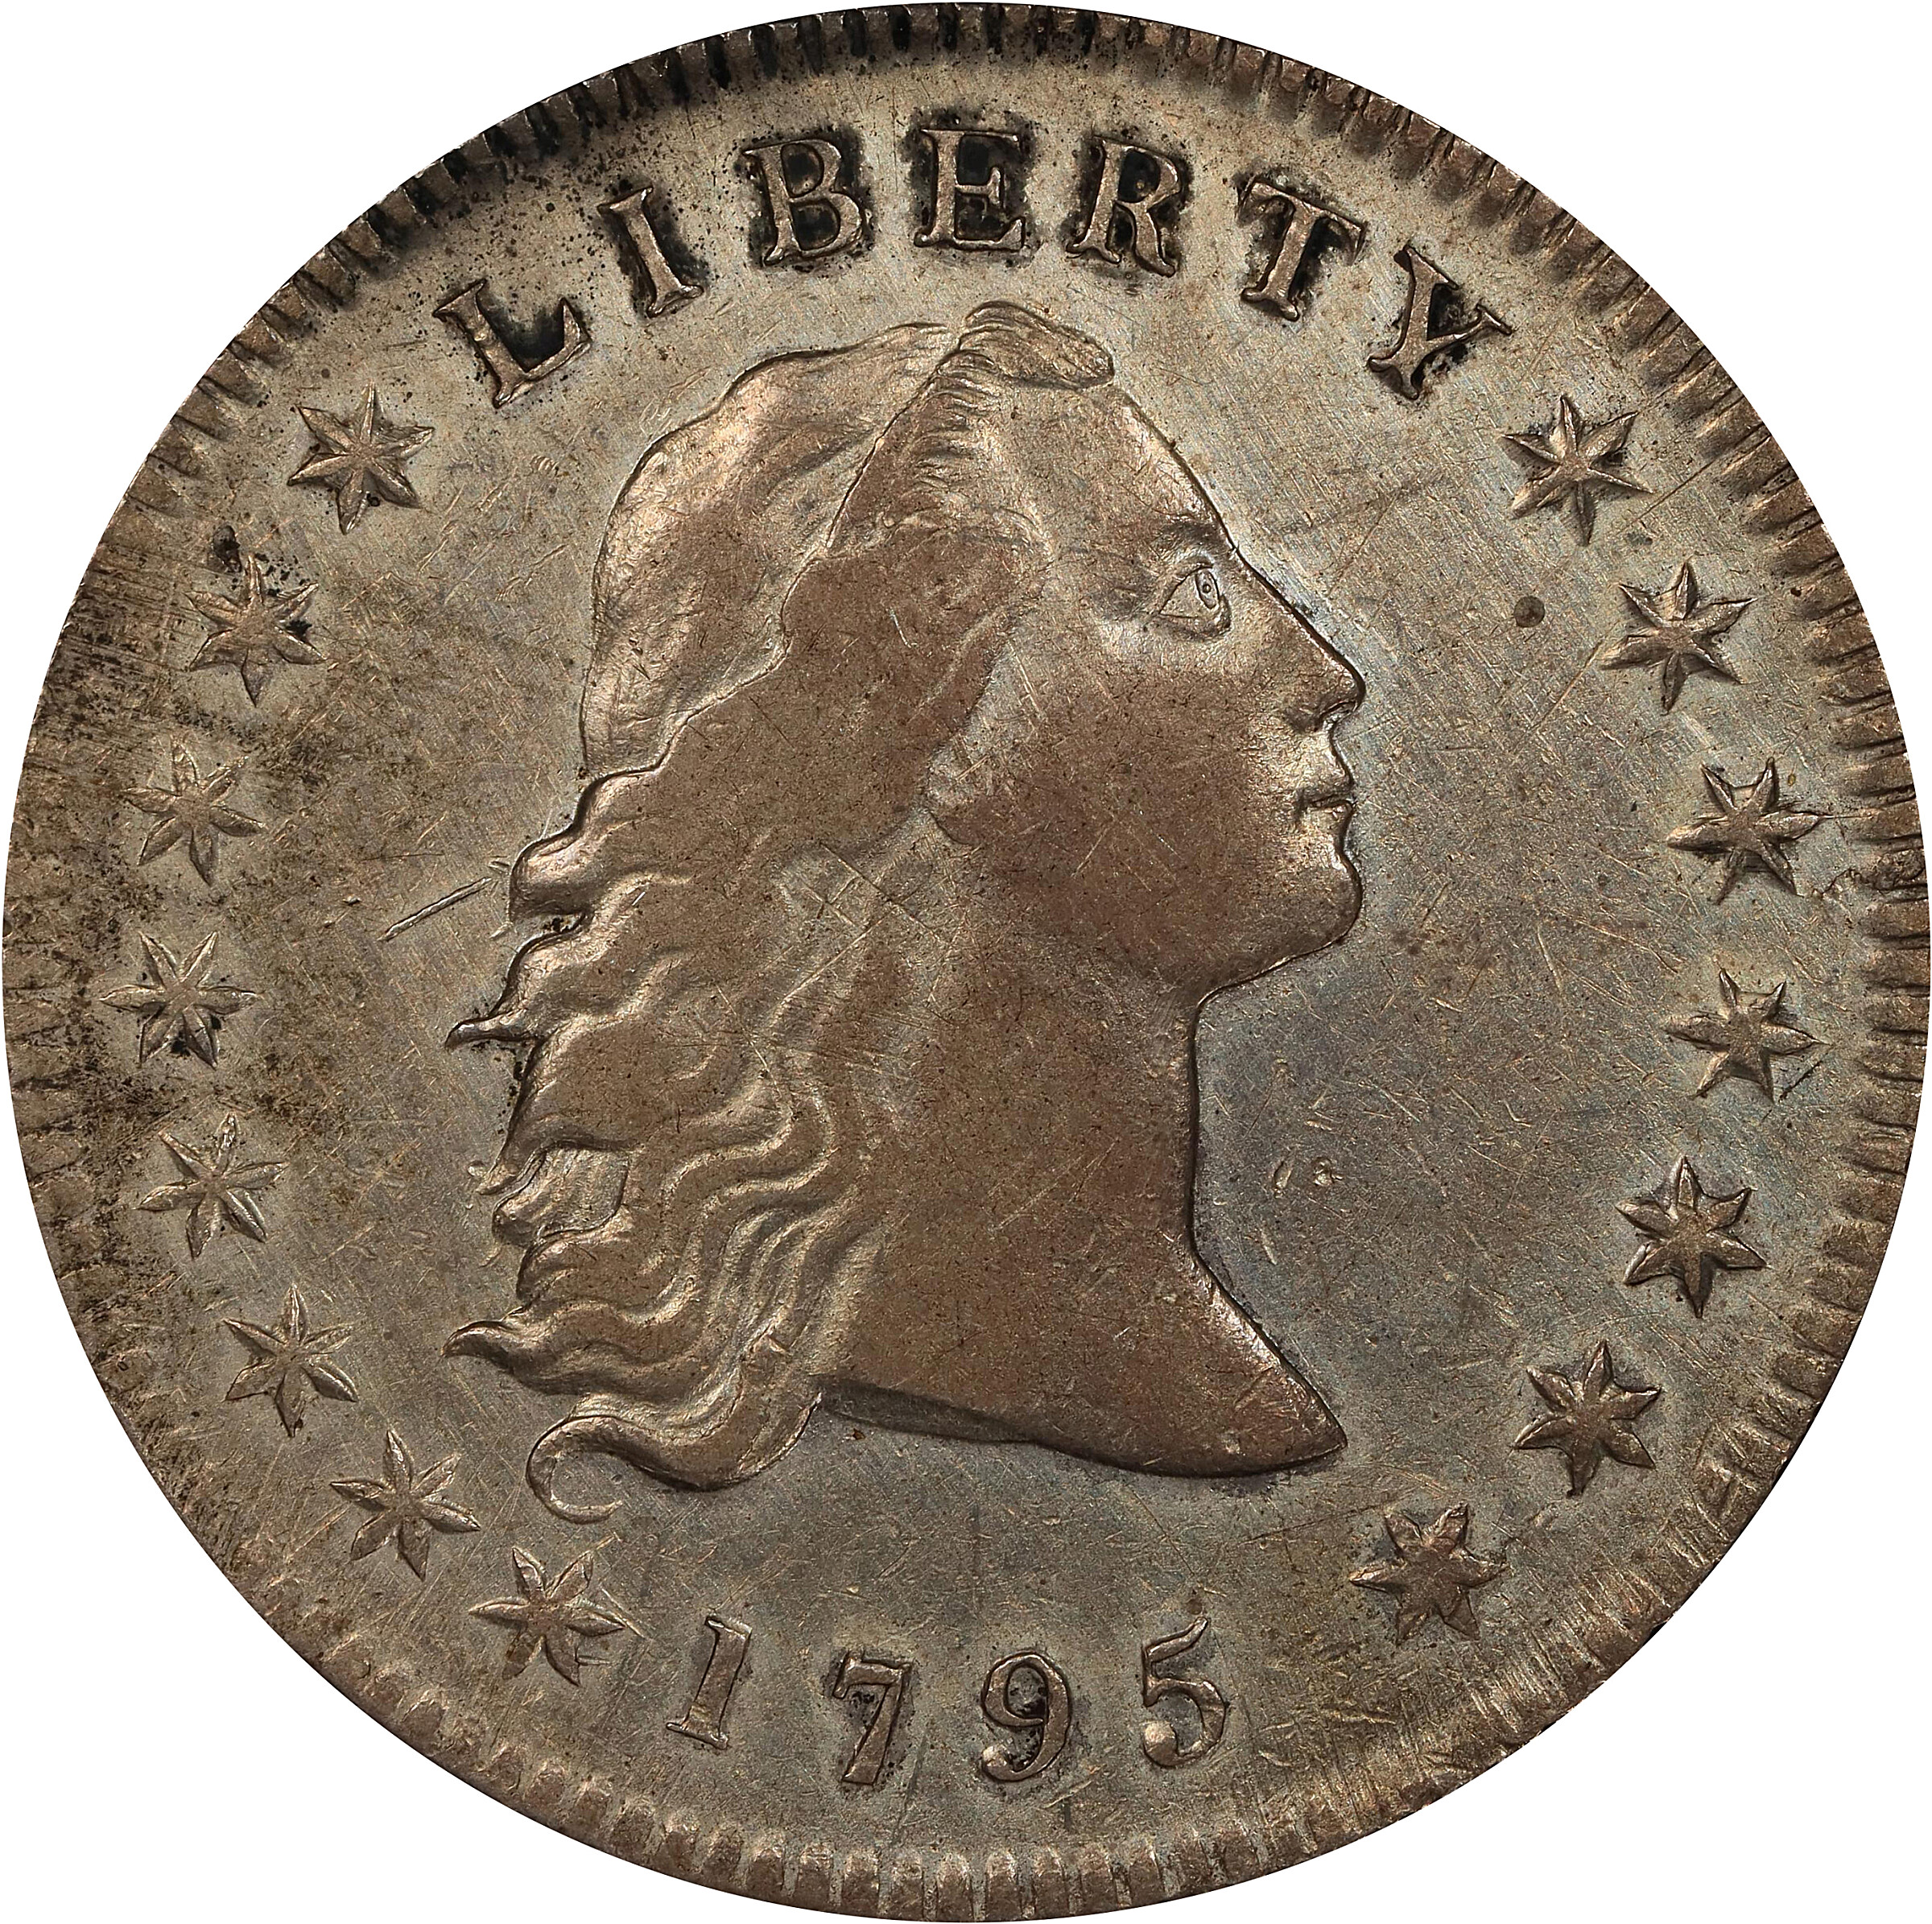 Flowing Hair Dollar (1794-1795) - Coins for sale on Collectors Corner